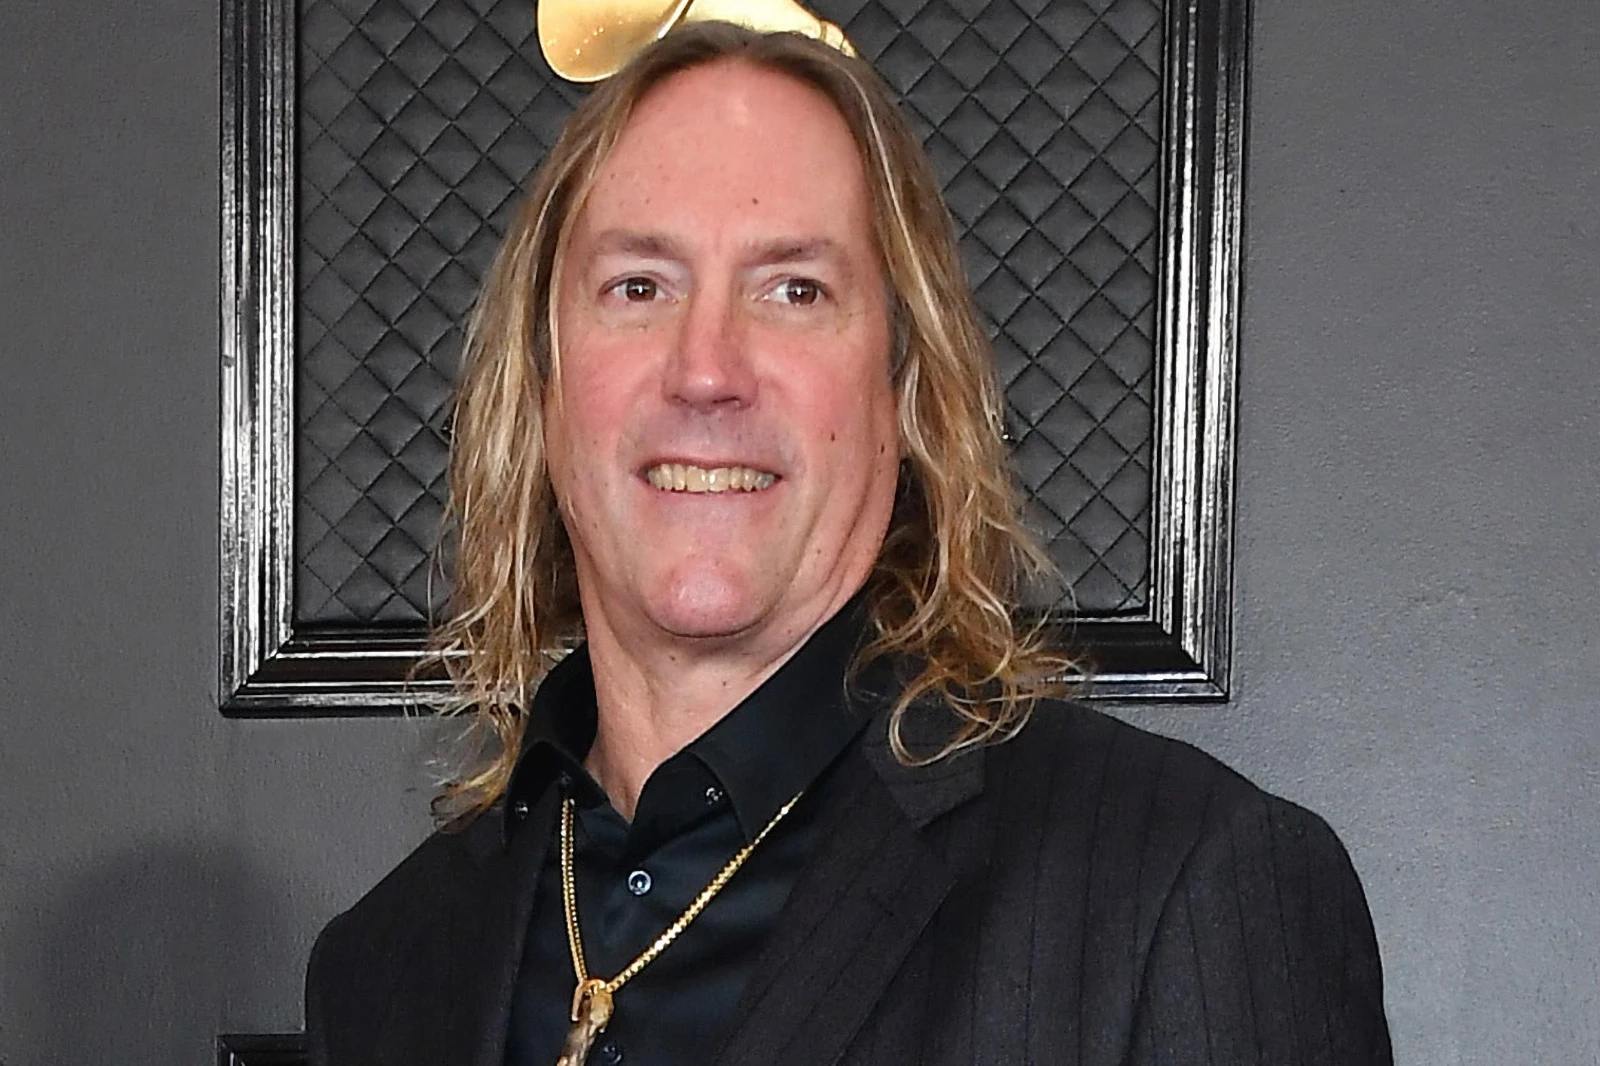 Tool’s Danny Carey Won’t Face Airport Assault Charges